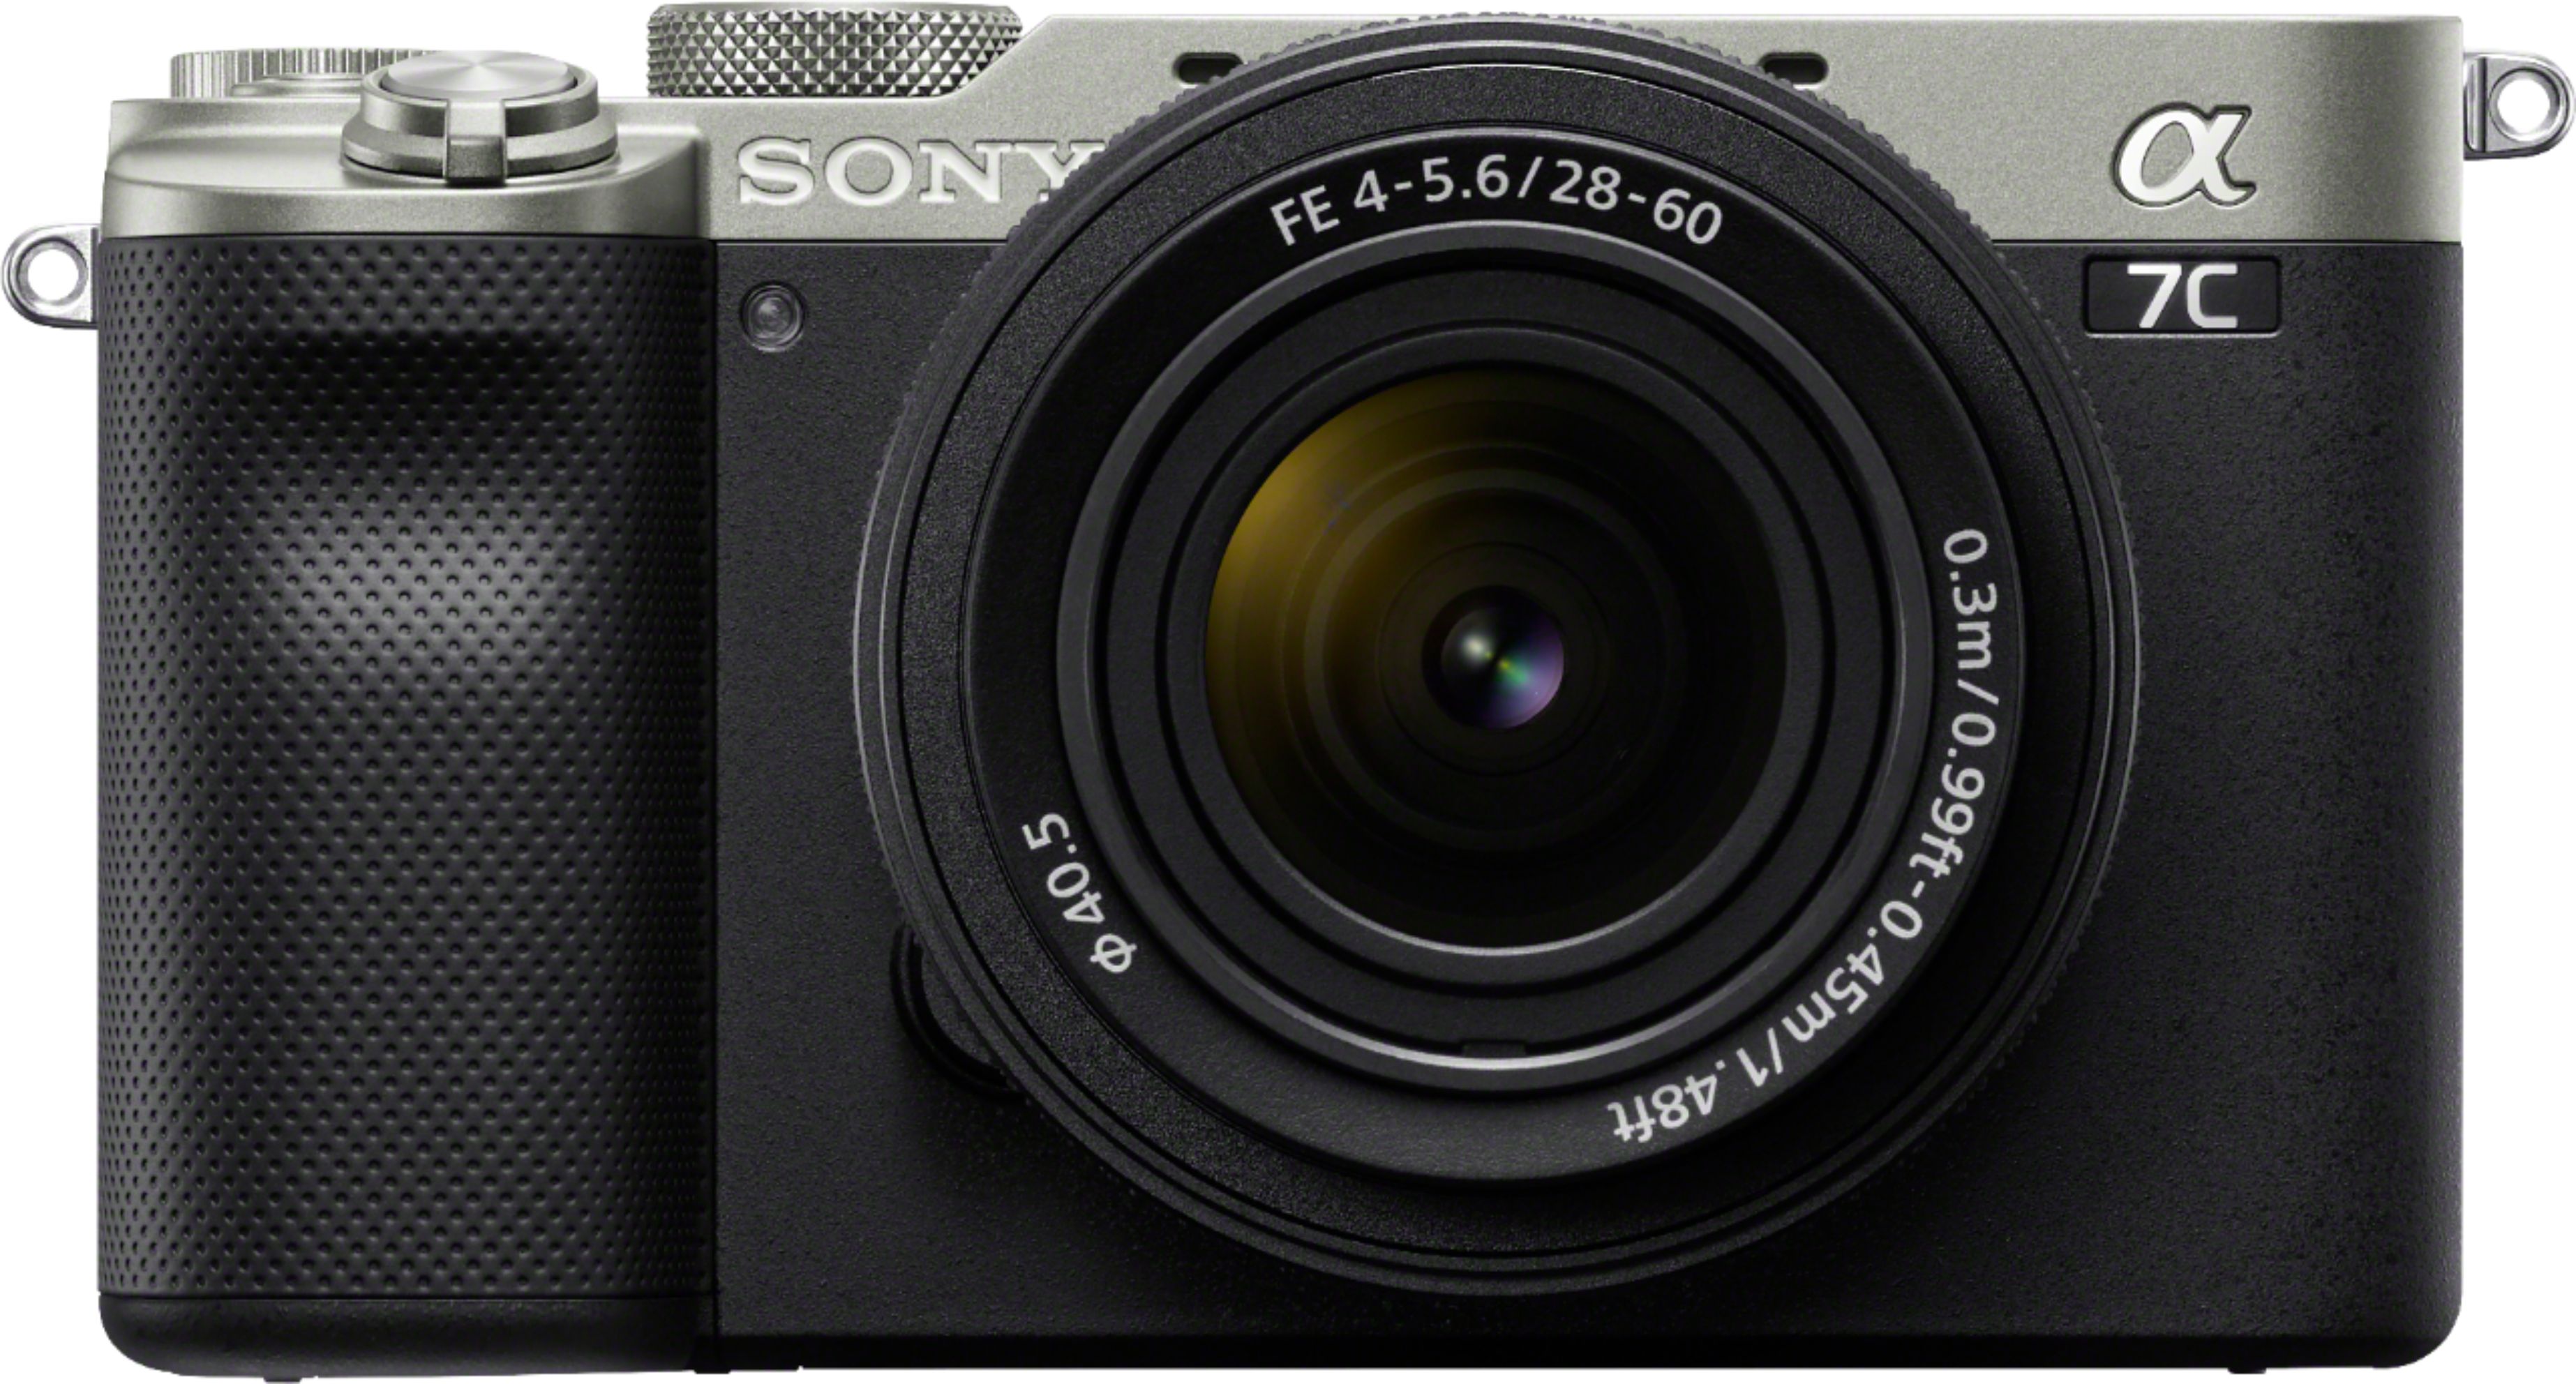 Sony Alpha 7C Full-frame Compact Mirrorless Camera with FE 28-60mm 